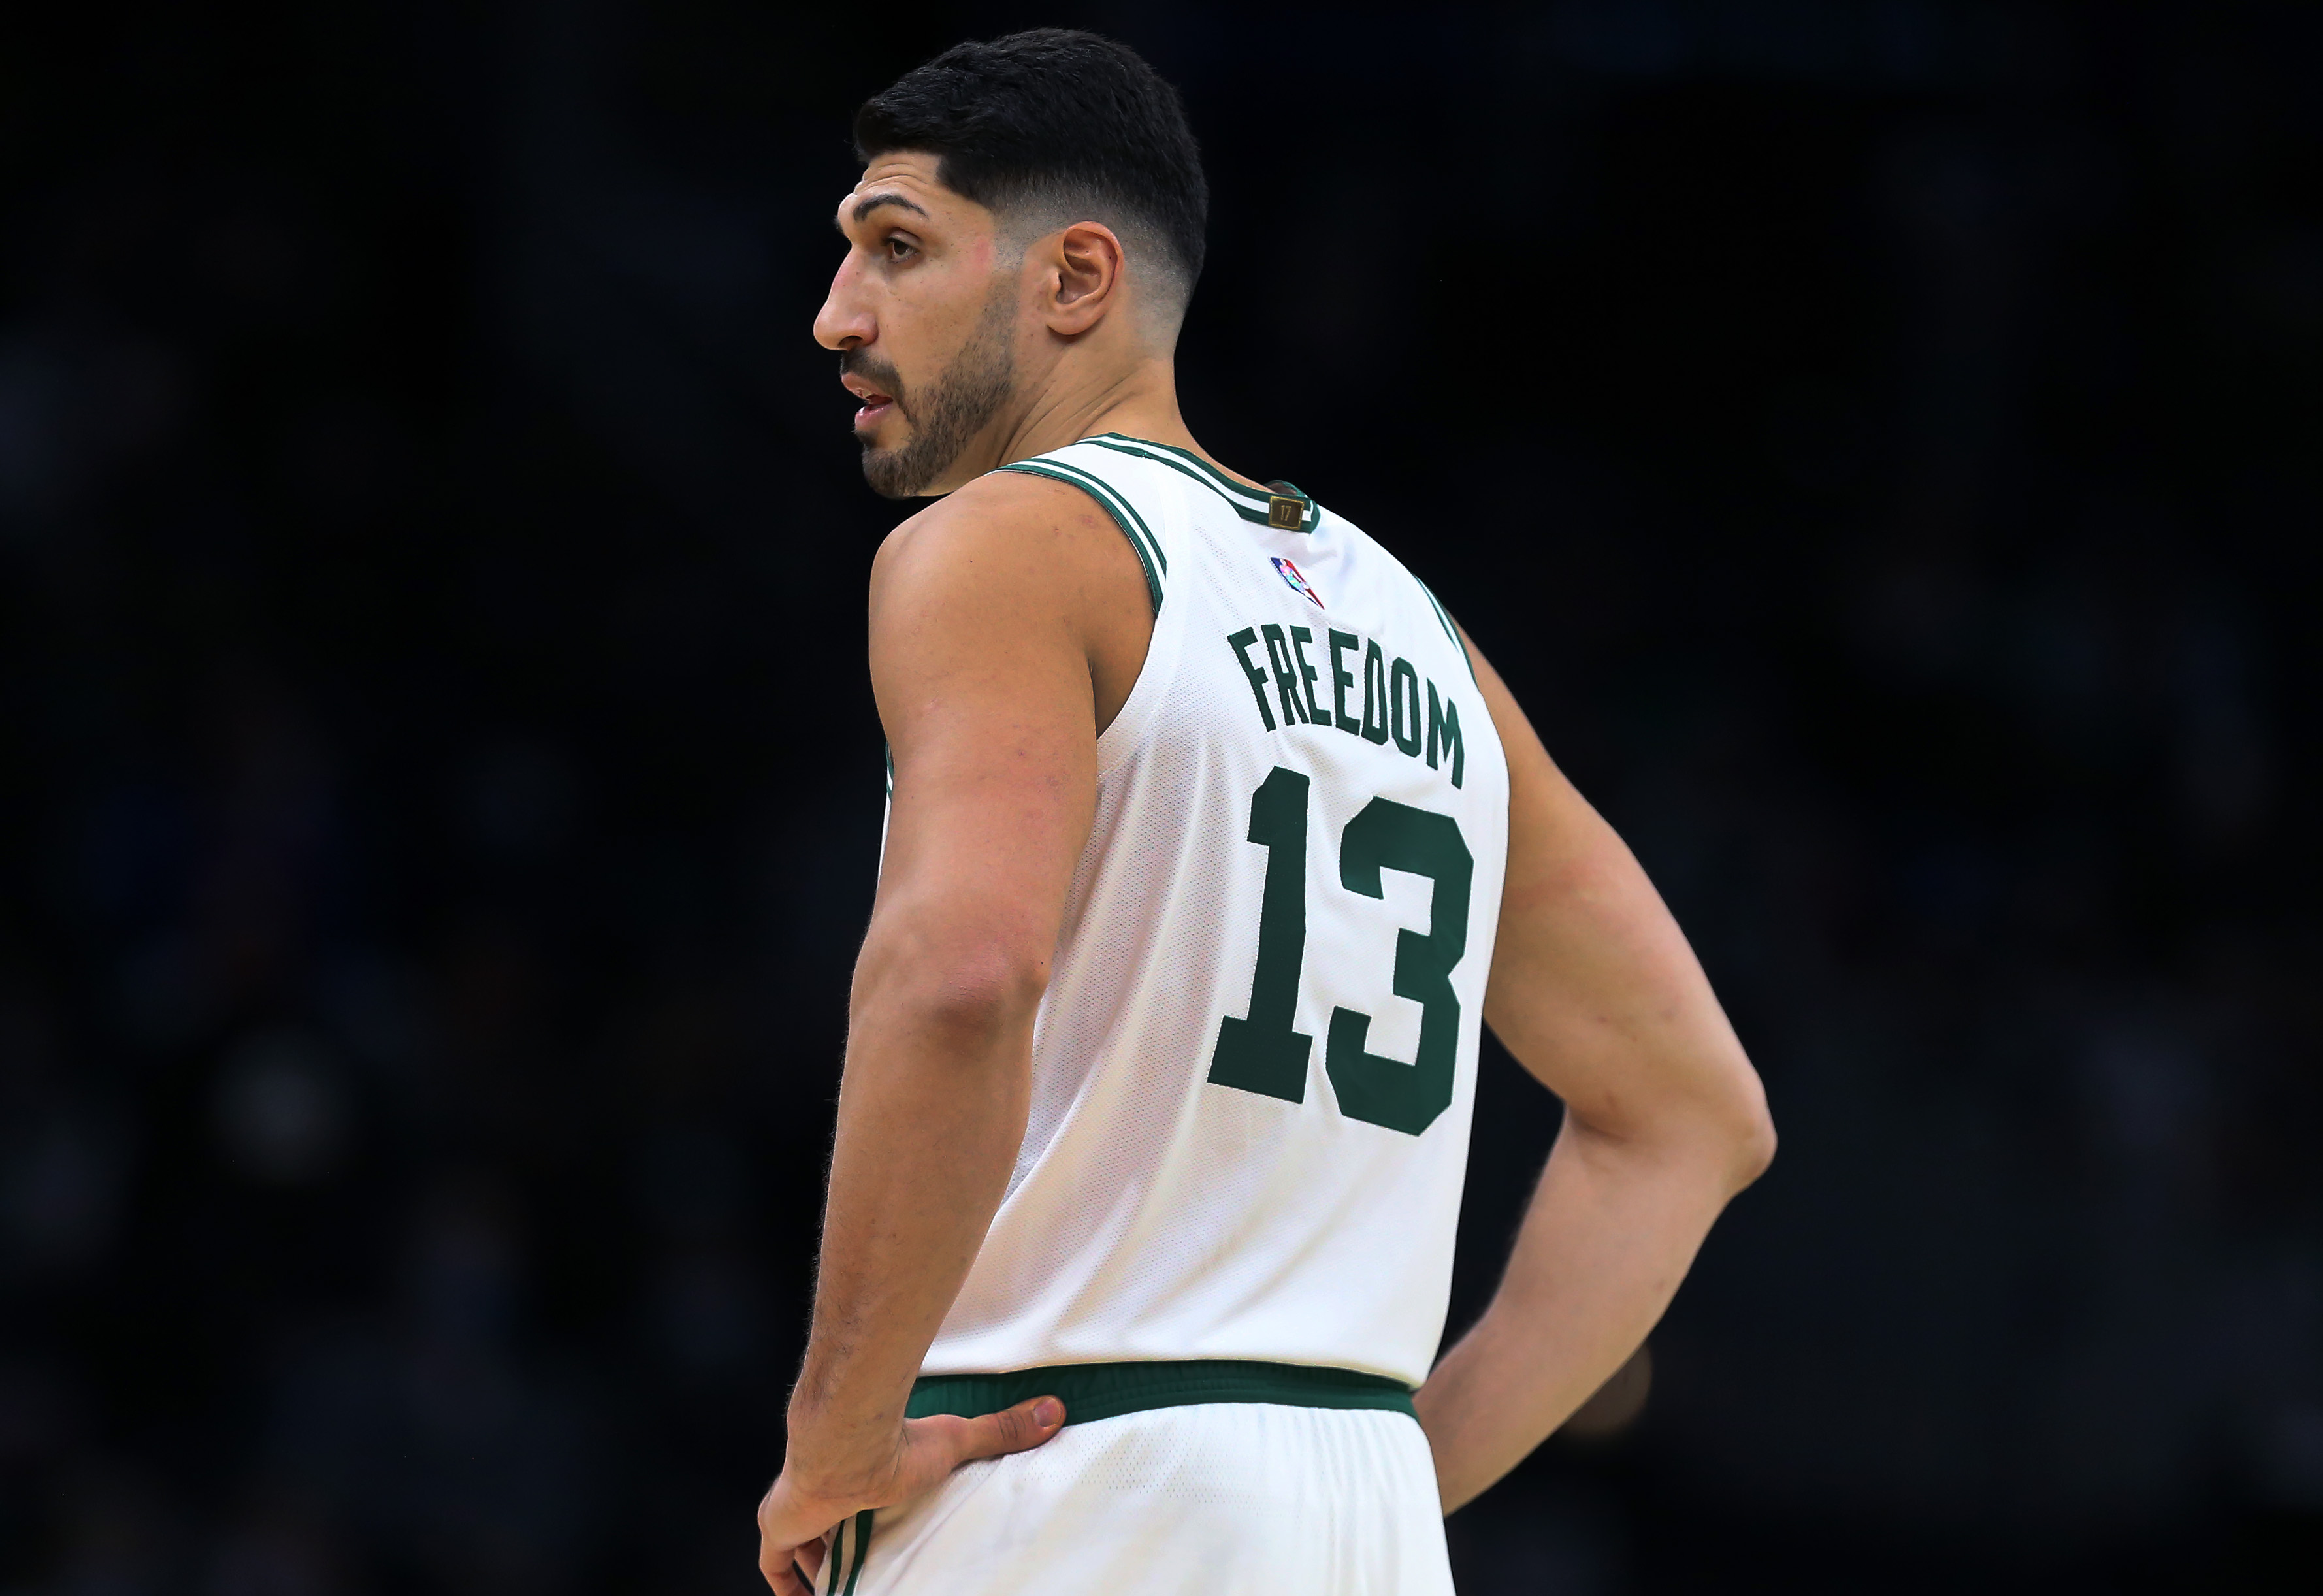 Why Enes Kanter Freedom is a proud American, speaks out on China